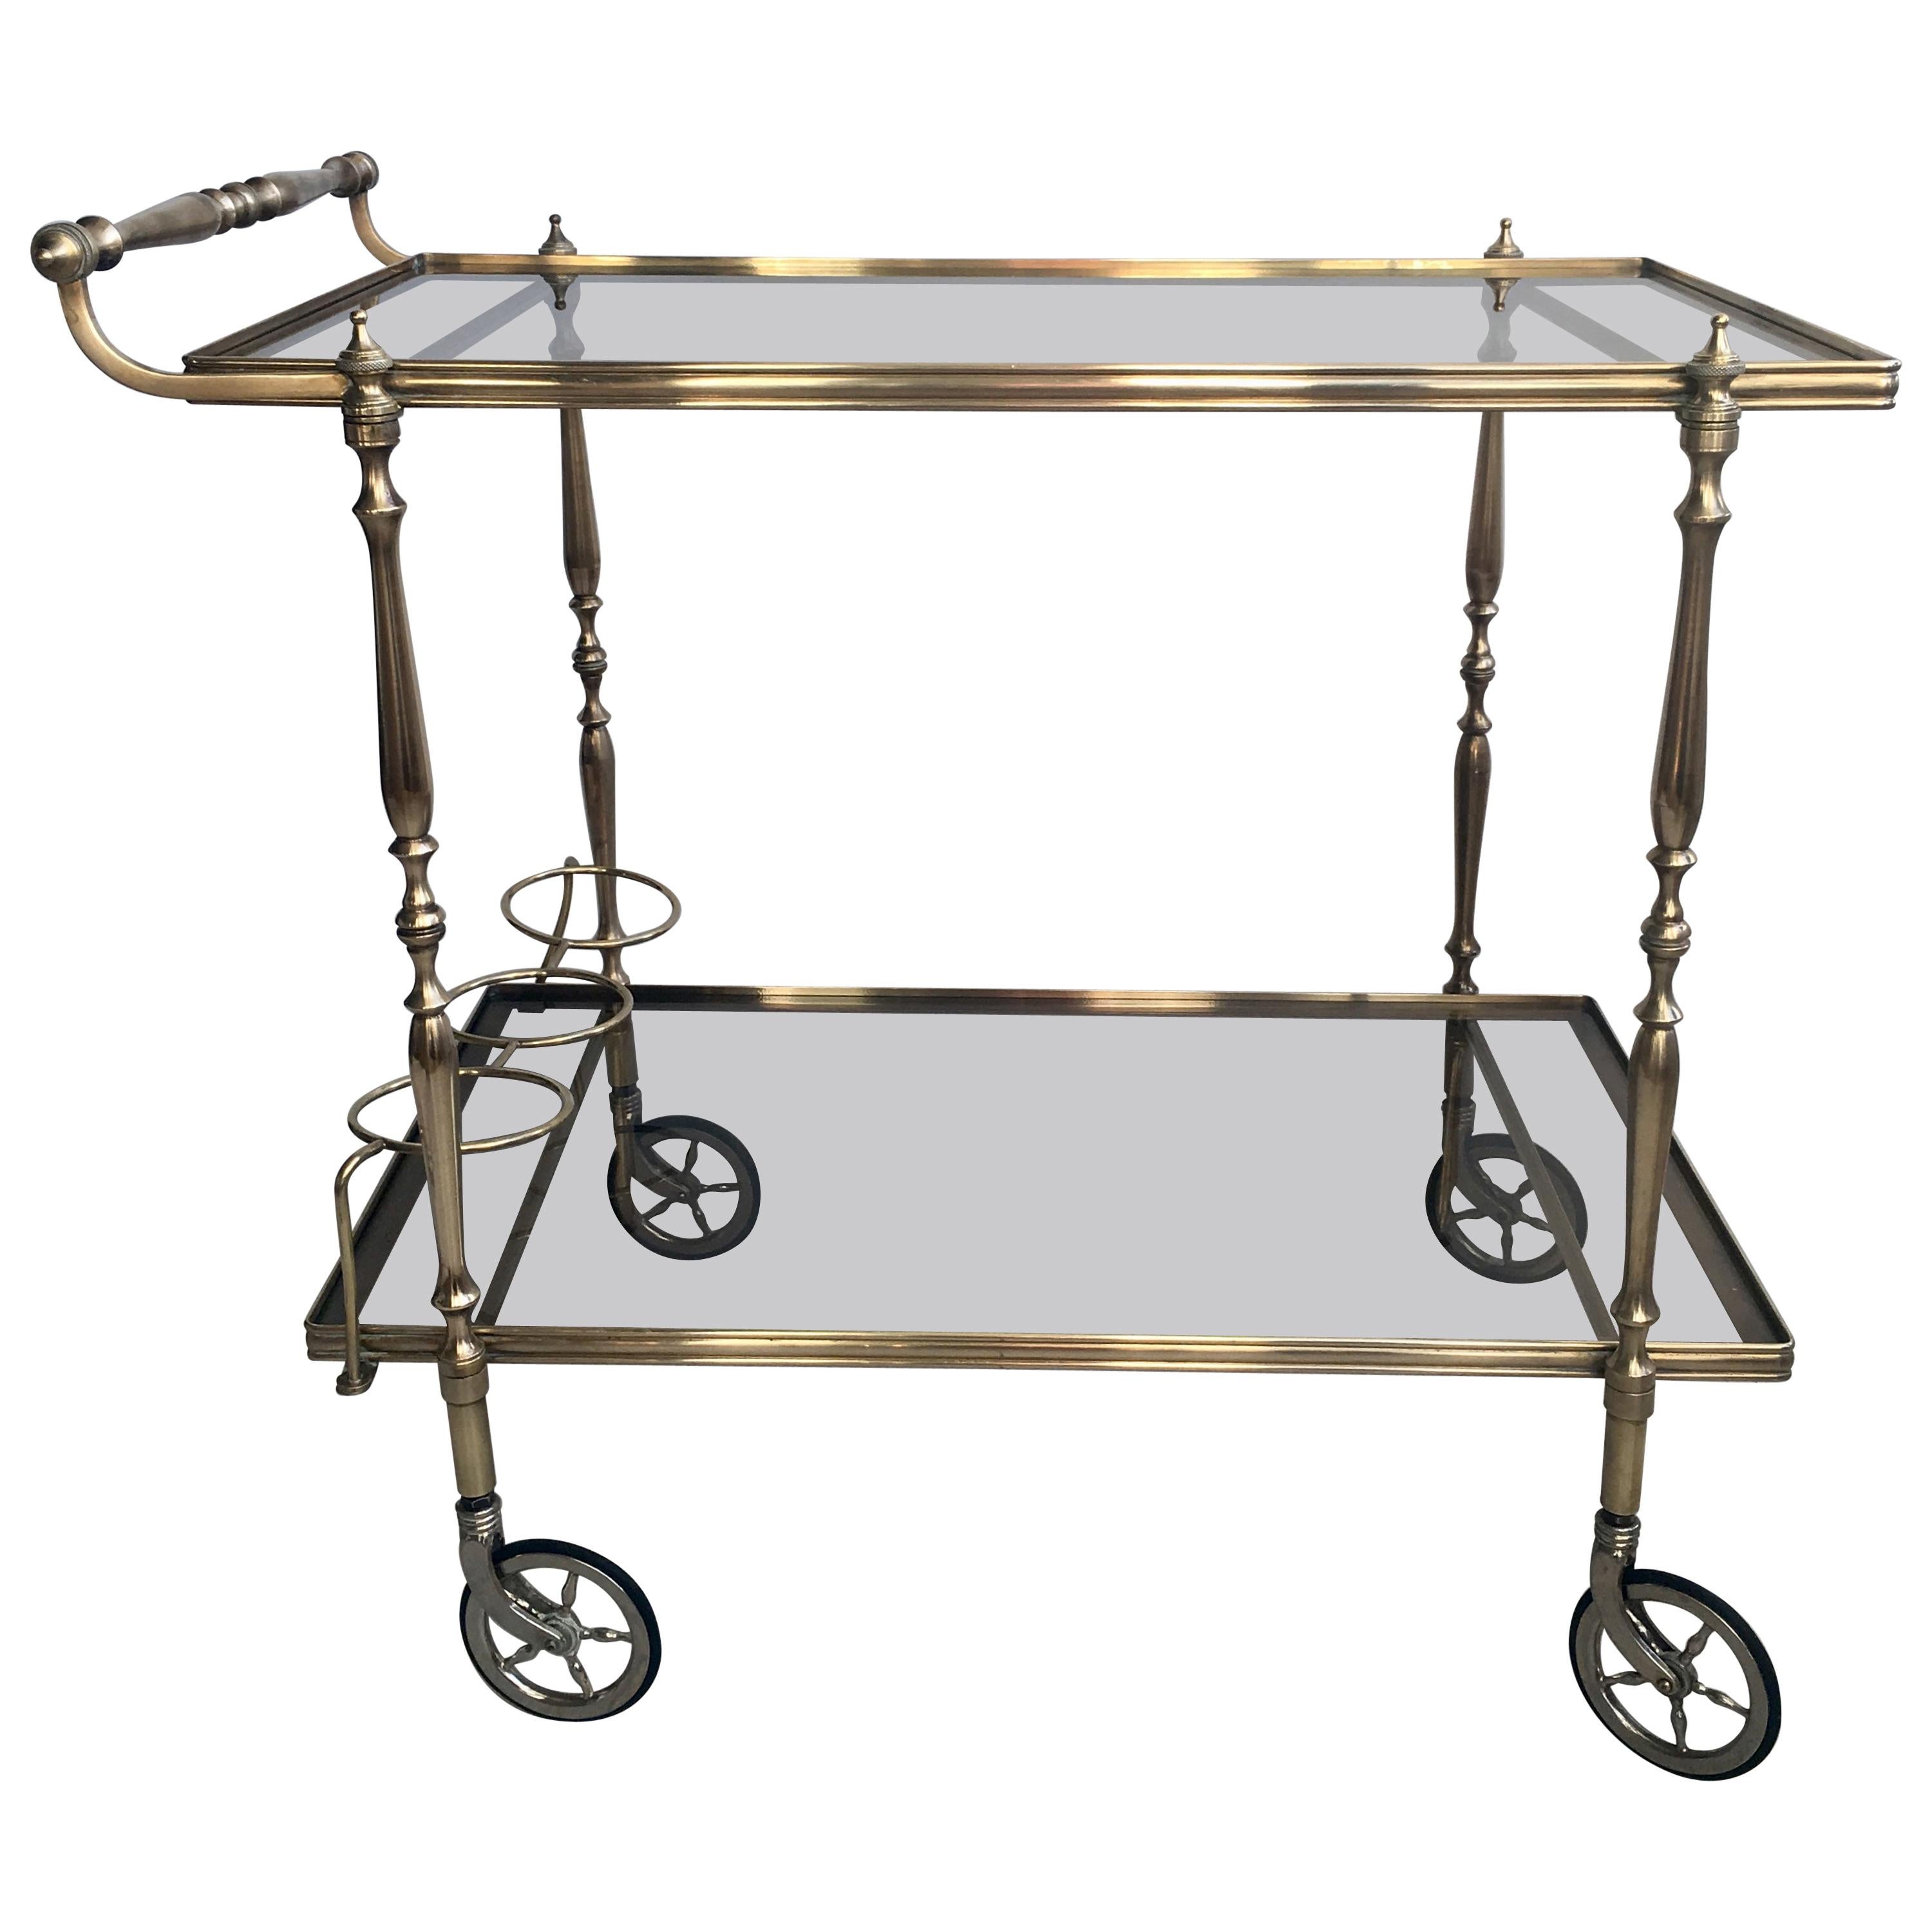 Decorative Vintage French Brass Drinks Trolley or Bar Cart For Sale